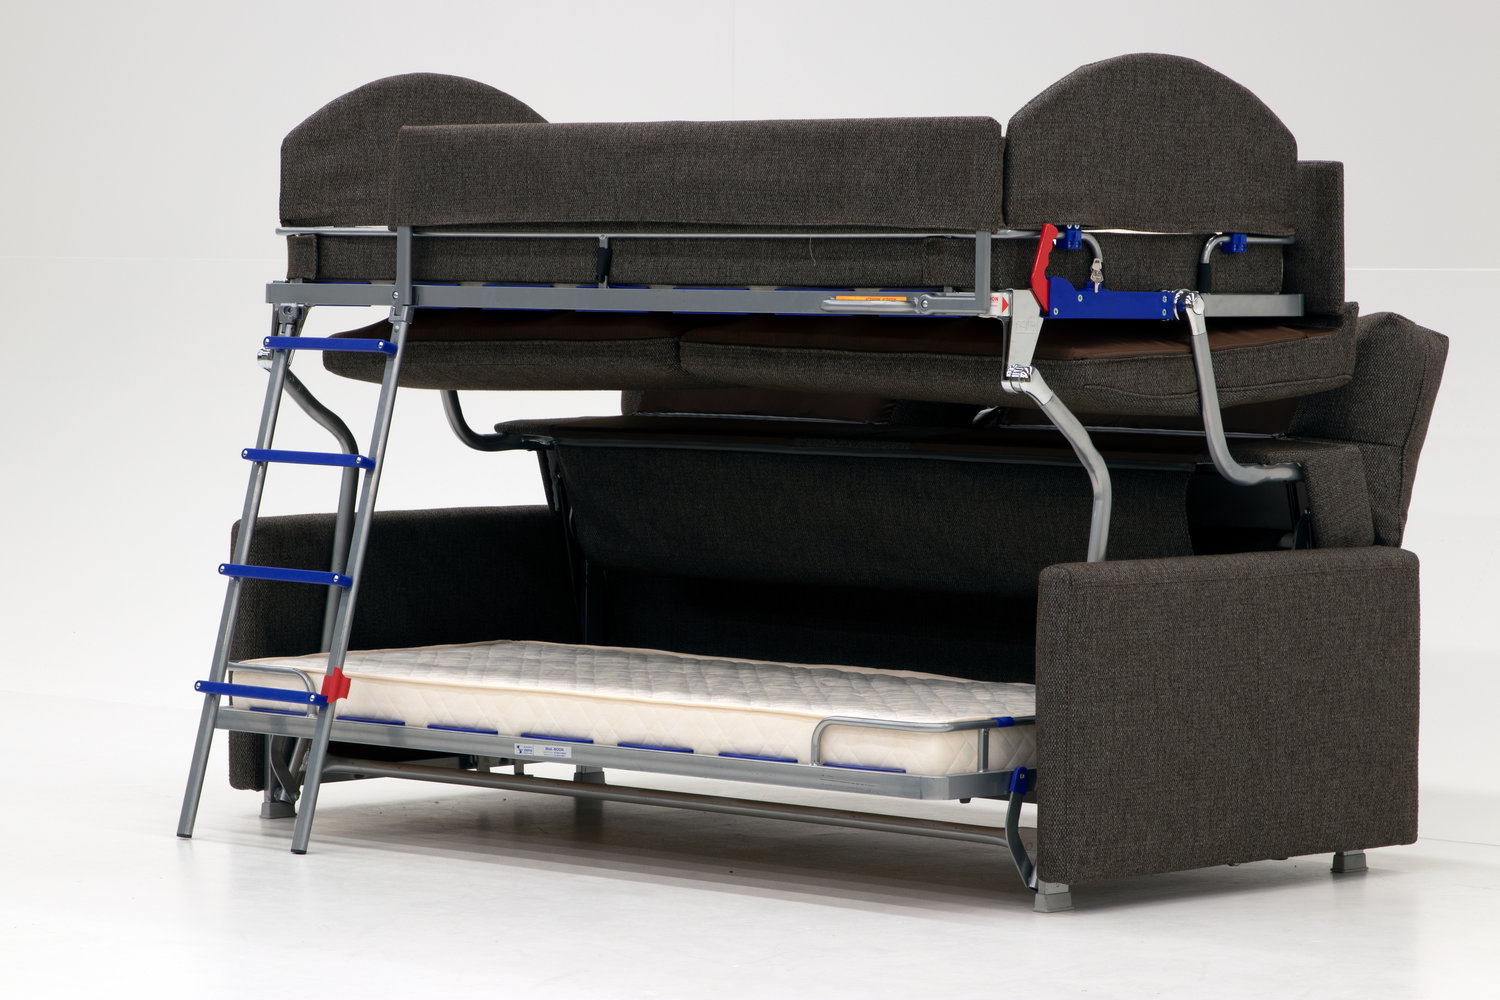 Elevate Bunk Sofa Bed M Collection Home, Bunk Bed Sofa And Desk